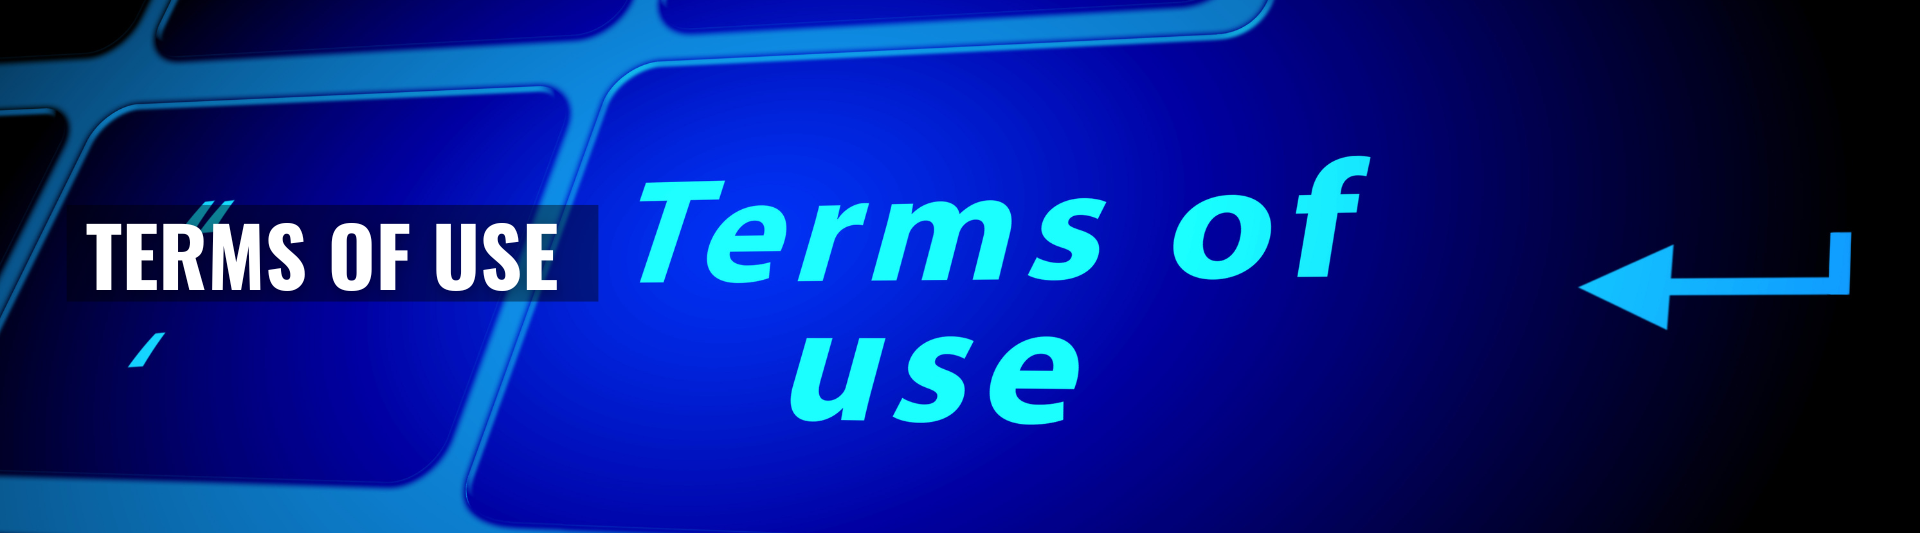 Website Terms of Use Policy